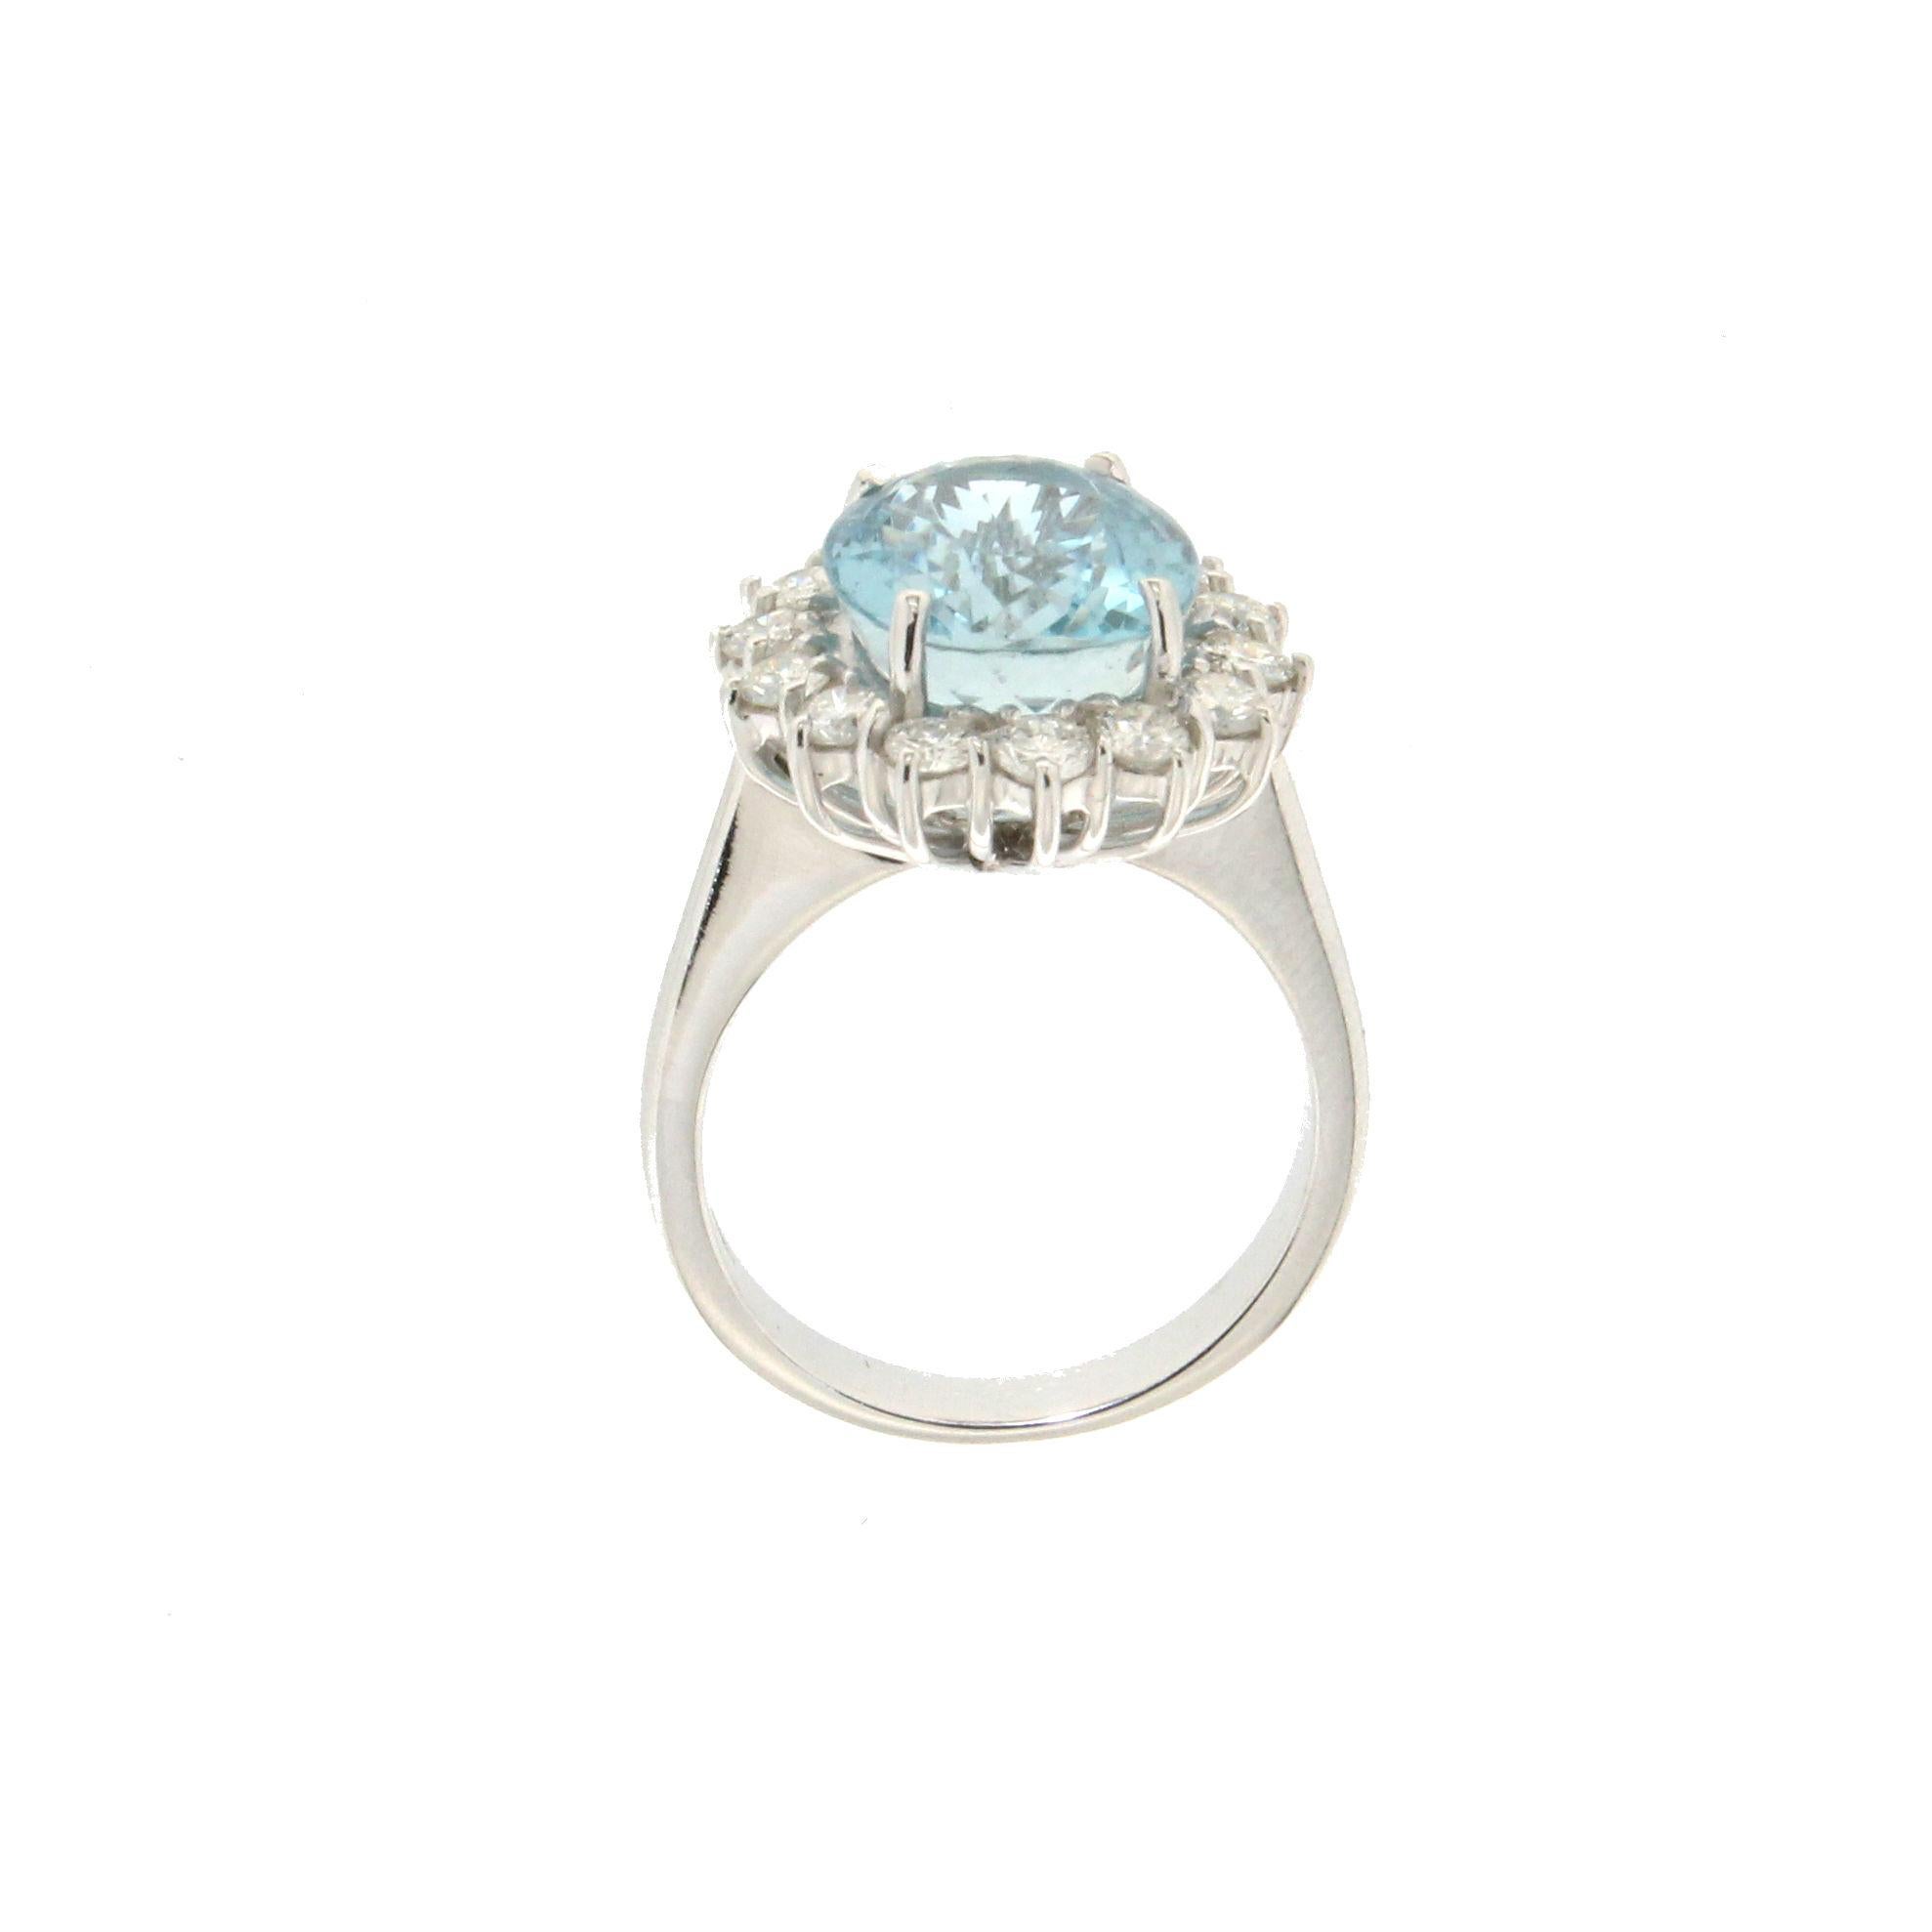 Handcraft Brazilian Aquamarine 18 Karat White Gold Diamonds Cocktail Ring In New Condition For Sale In Marcianise, IT